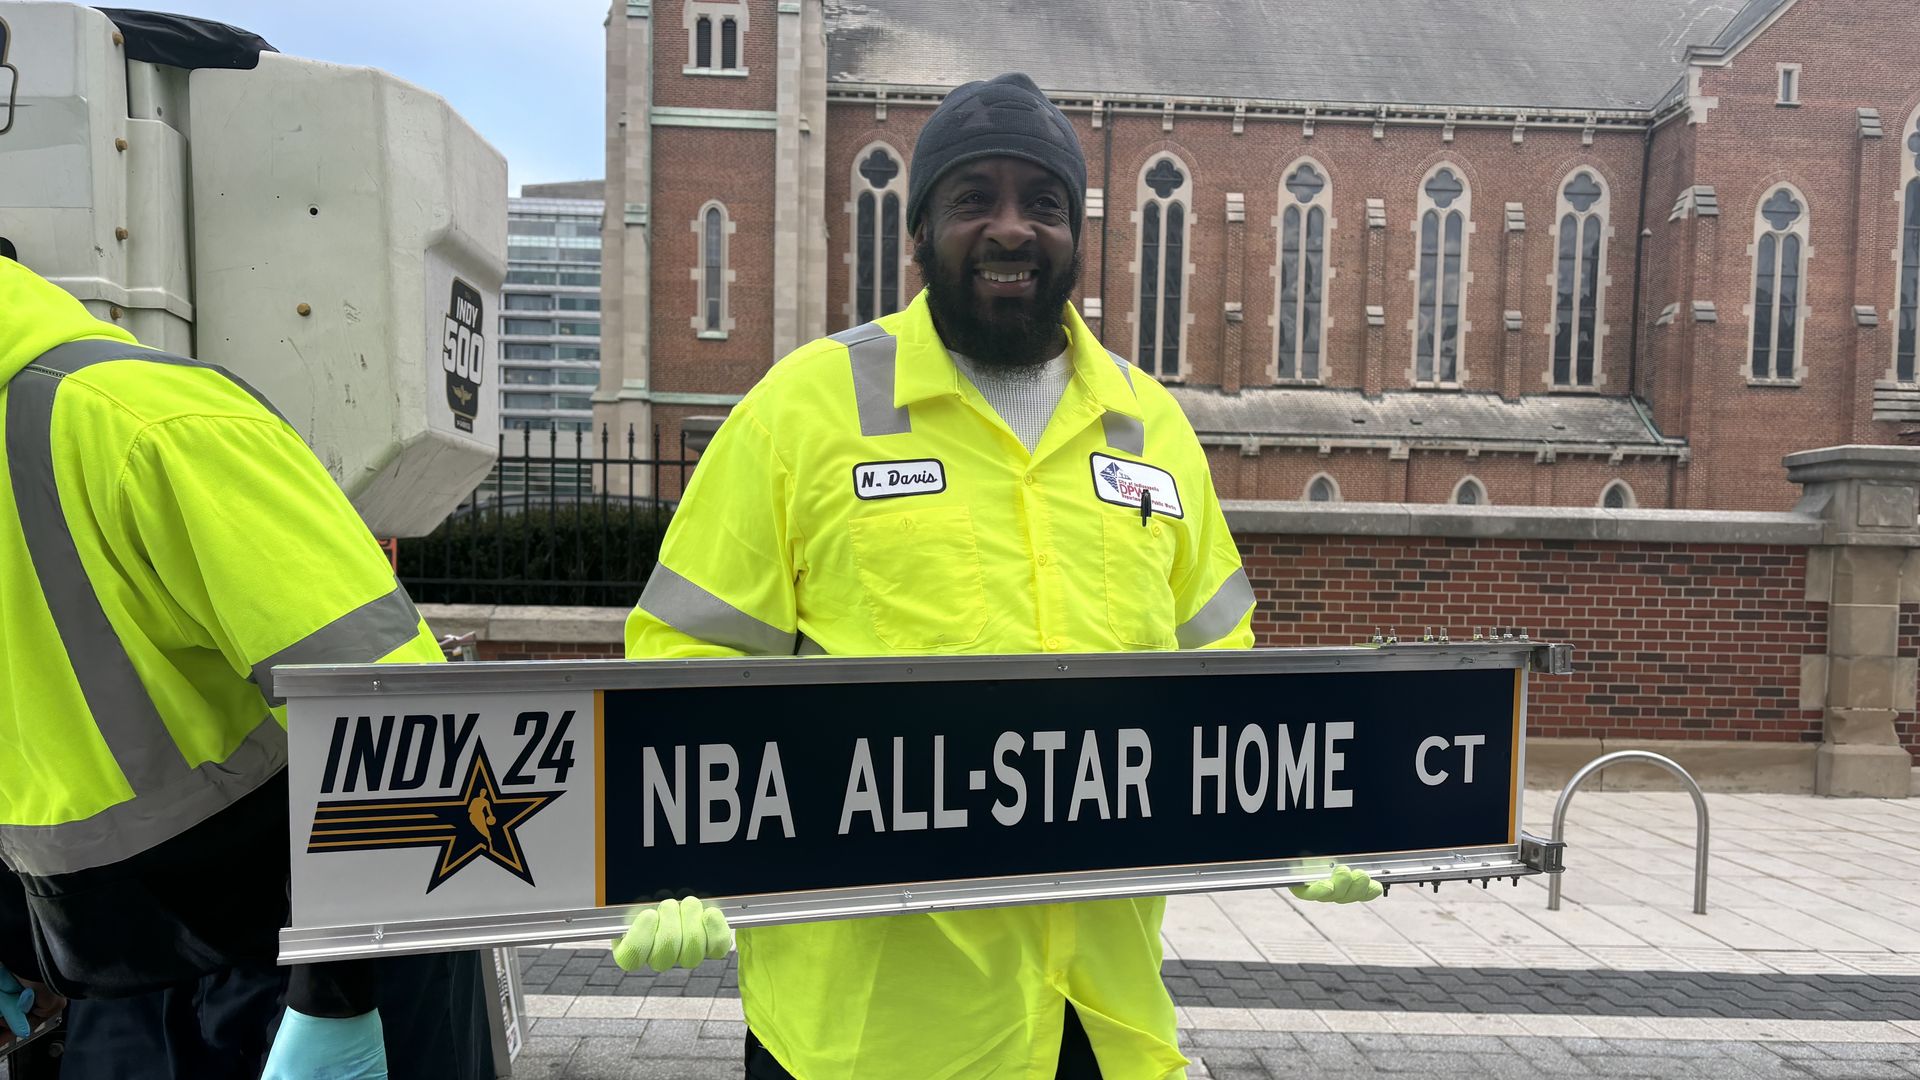 Here's a map of every NBA team street sign in Indianapolis for All